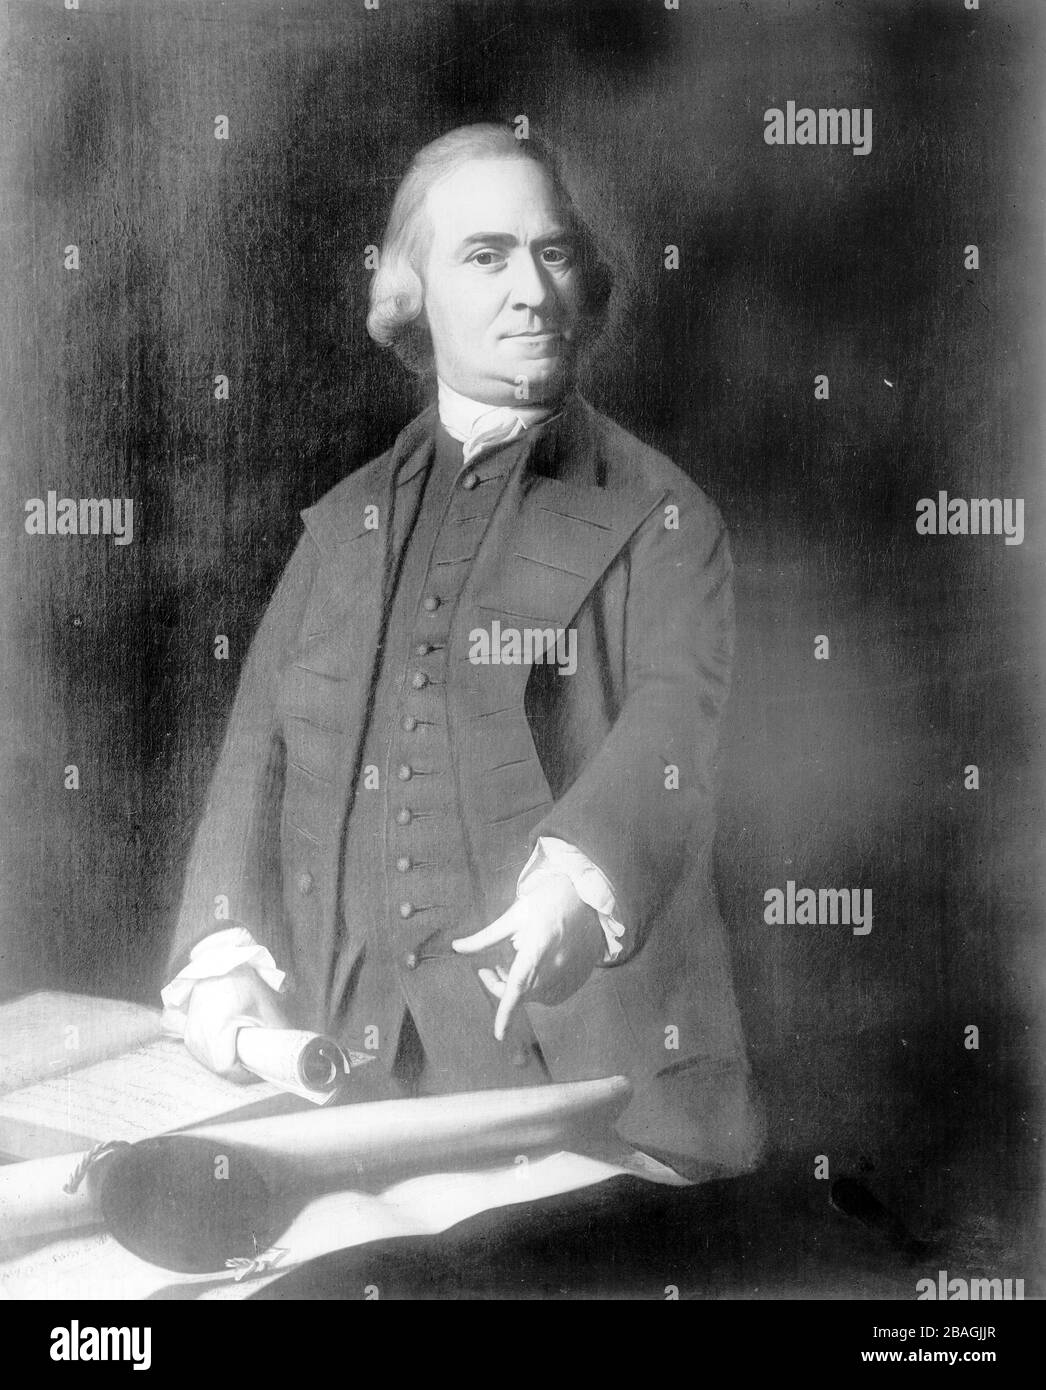 Samuel Adams (1722 – 1803) American statesman, political philosopher, and one of the Founding Fathers of the United States. Stock Photo